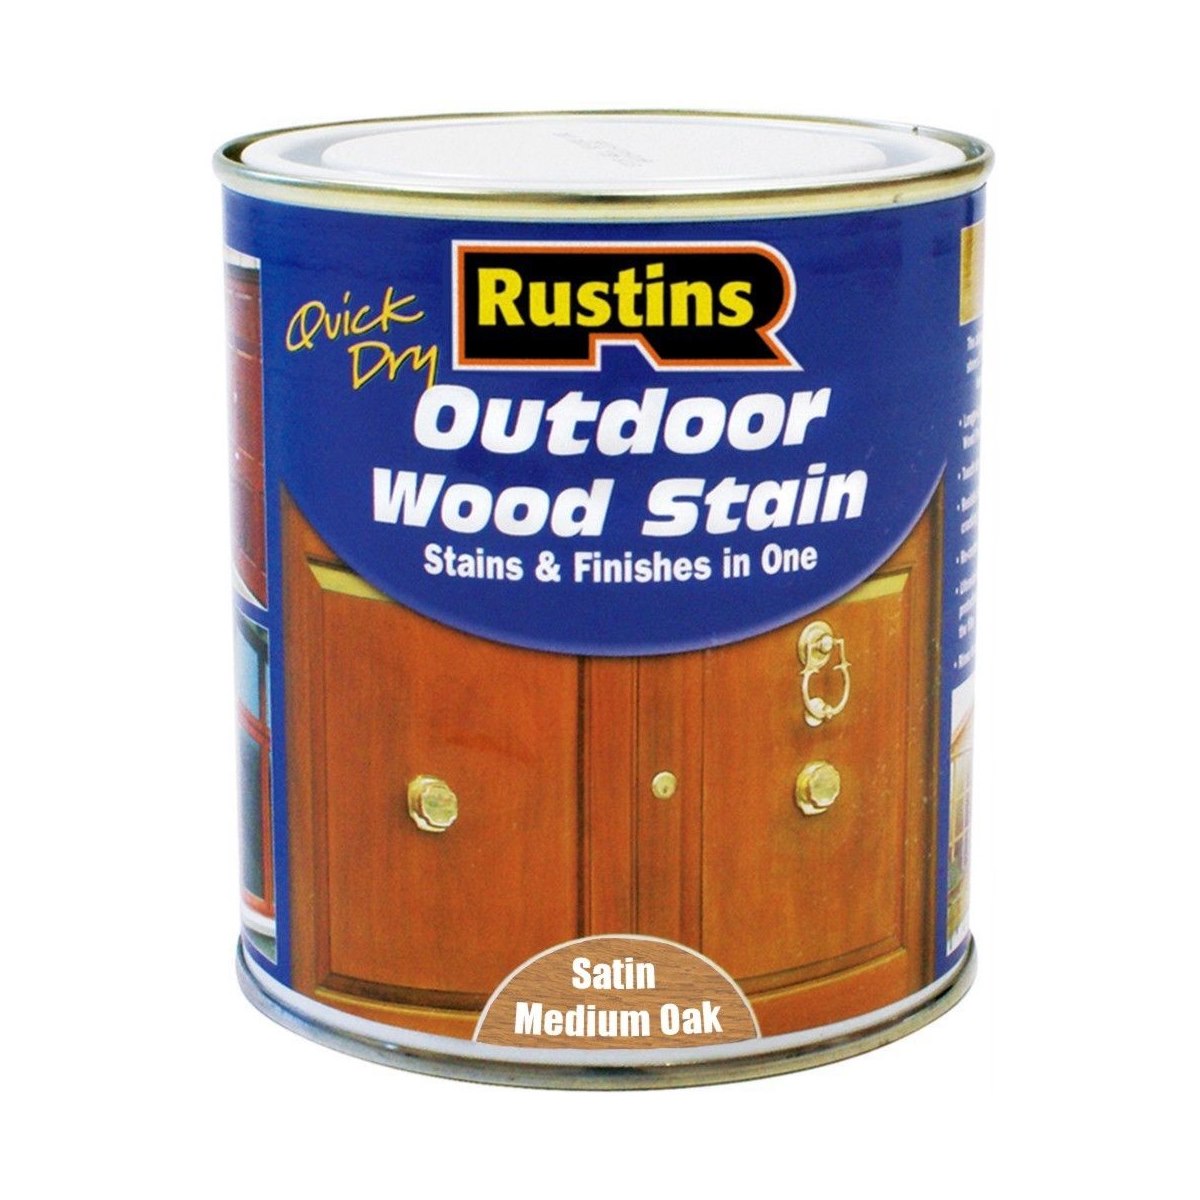 Rustins Quick Dry Outdoor Wood Stain, Outdoor Wood Stain